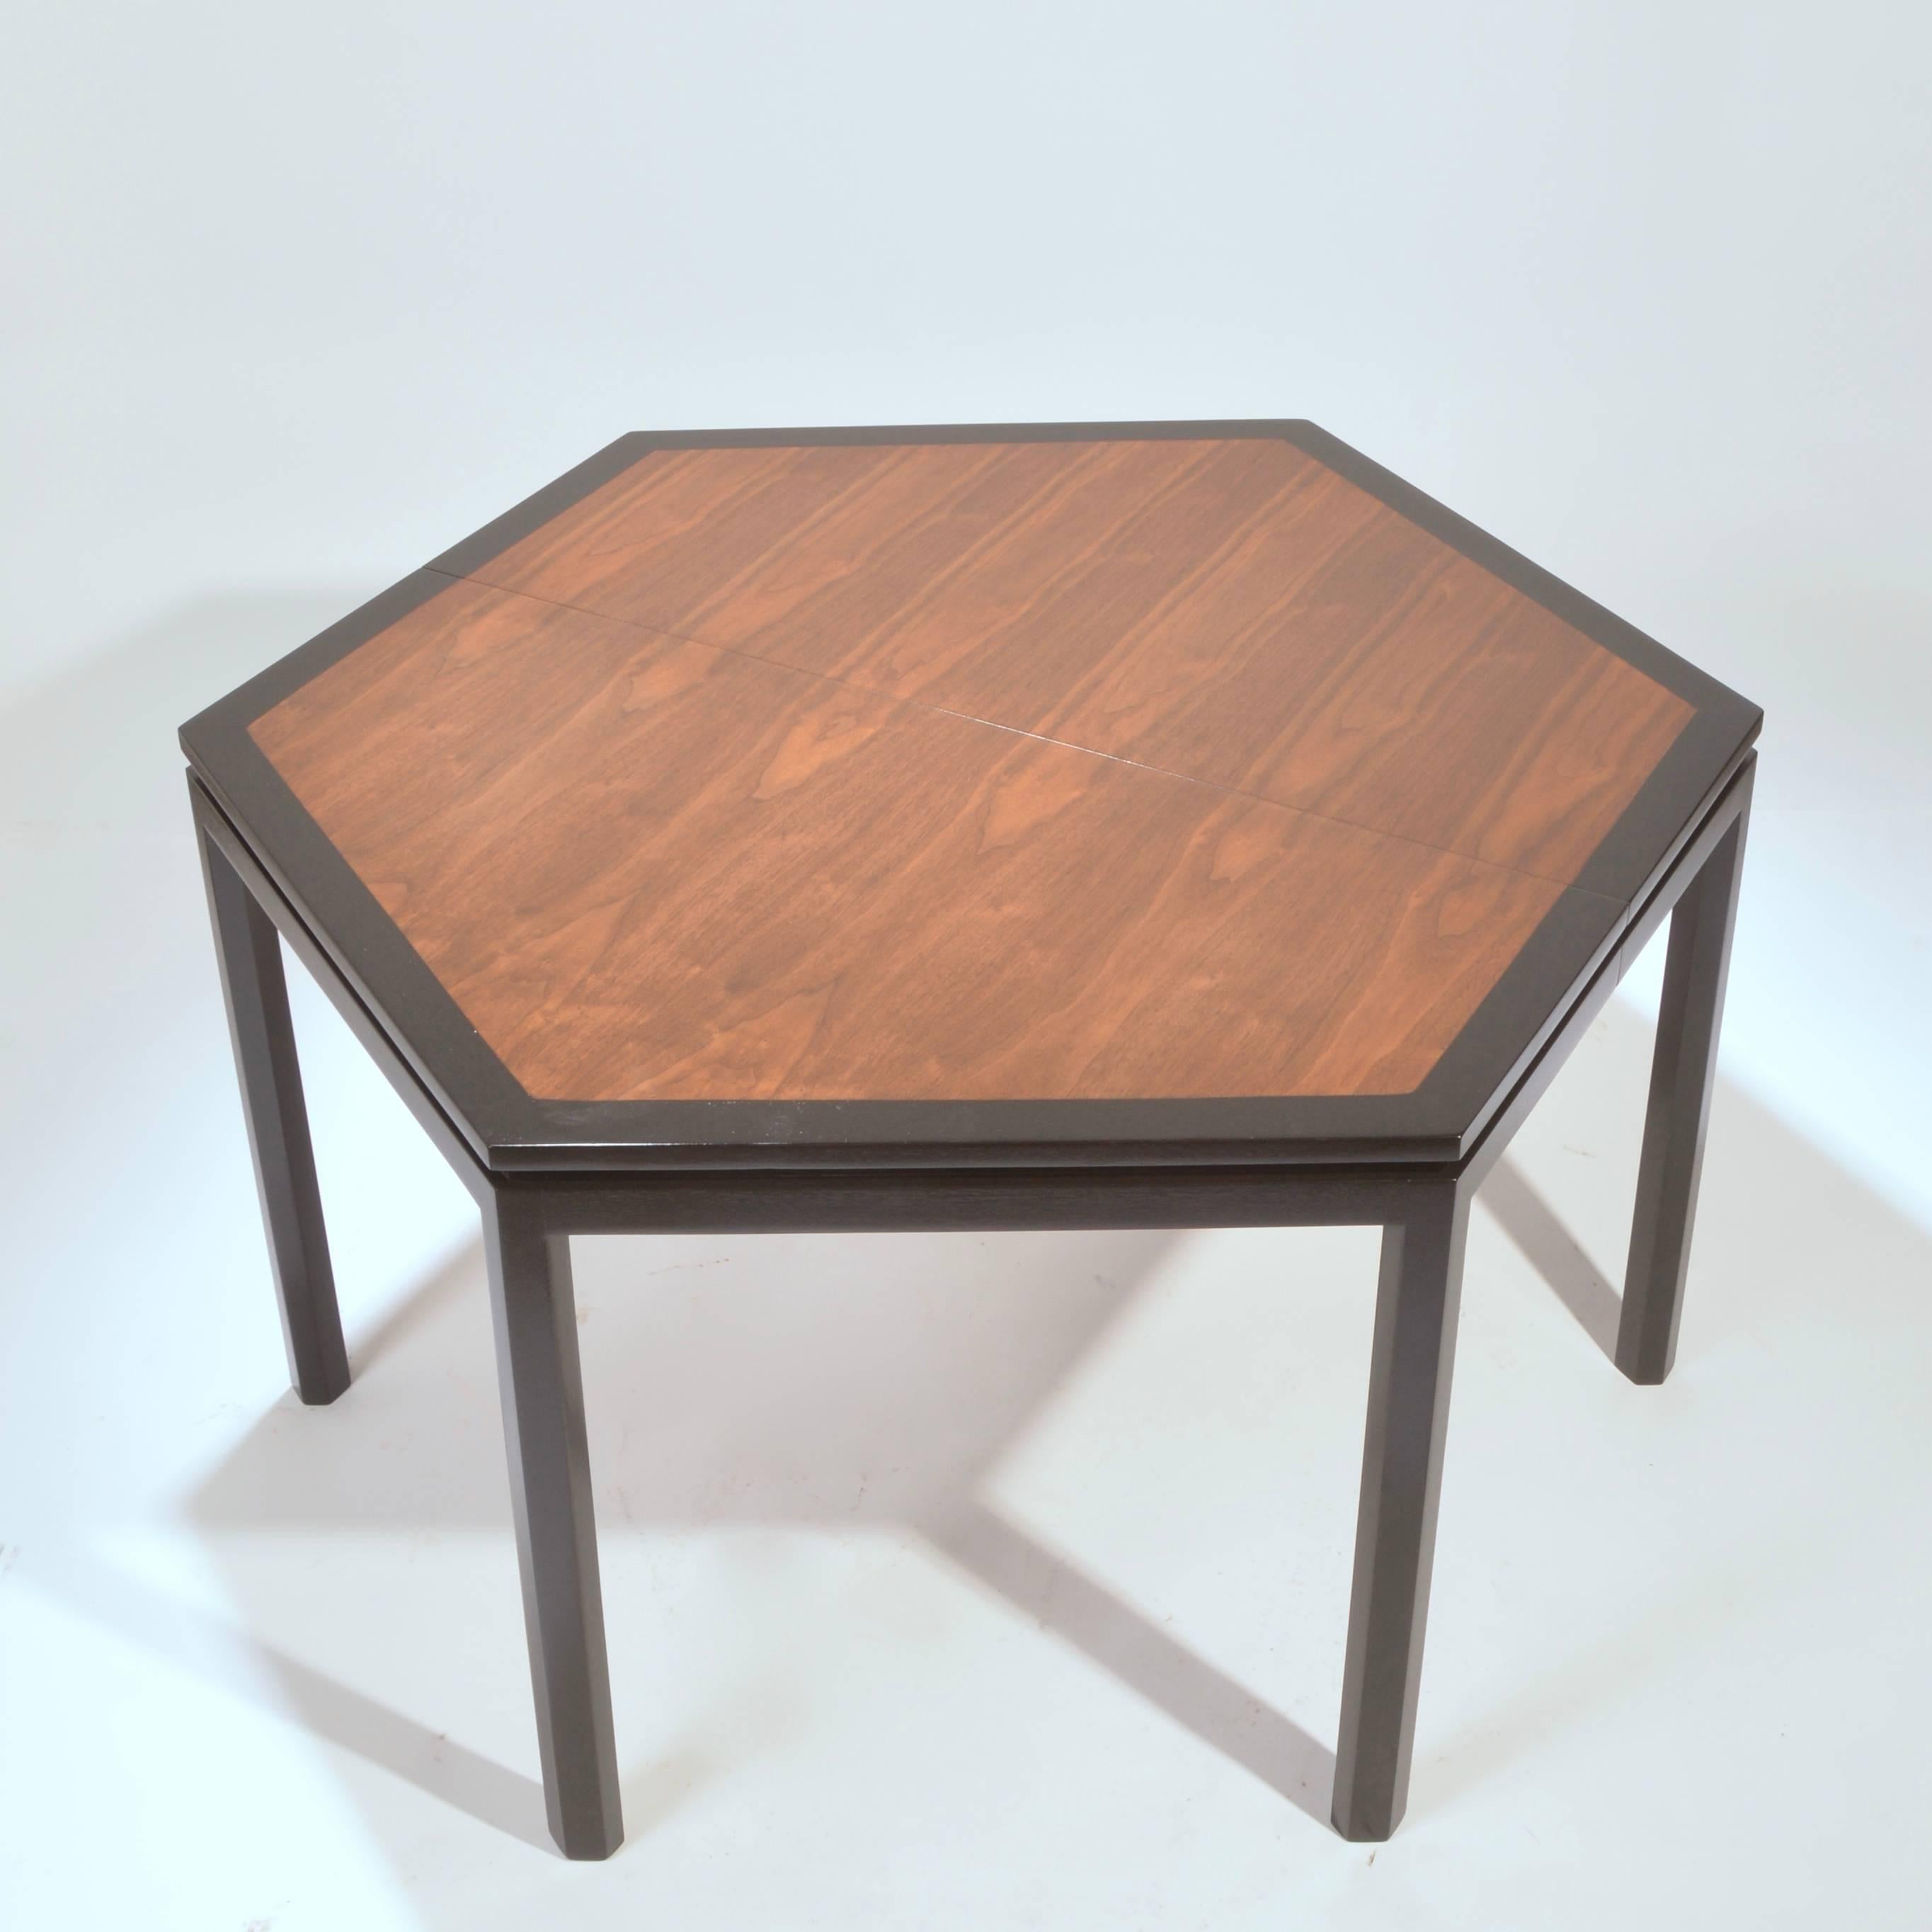 Extremely rare hexagonal dining table by Edward Wormley for Dunbar. Walnut top with ebonized mahogany border. Comes with two offset grain 16